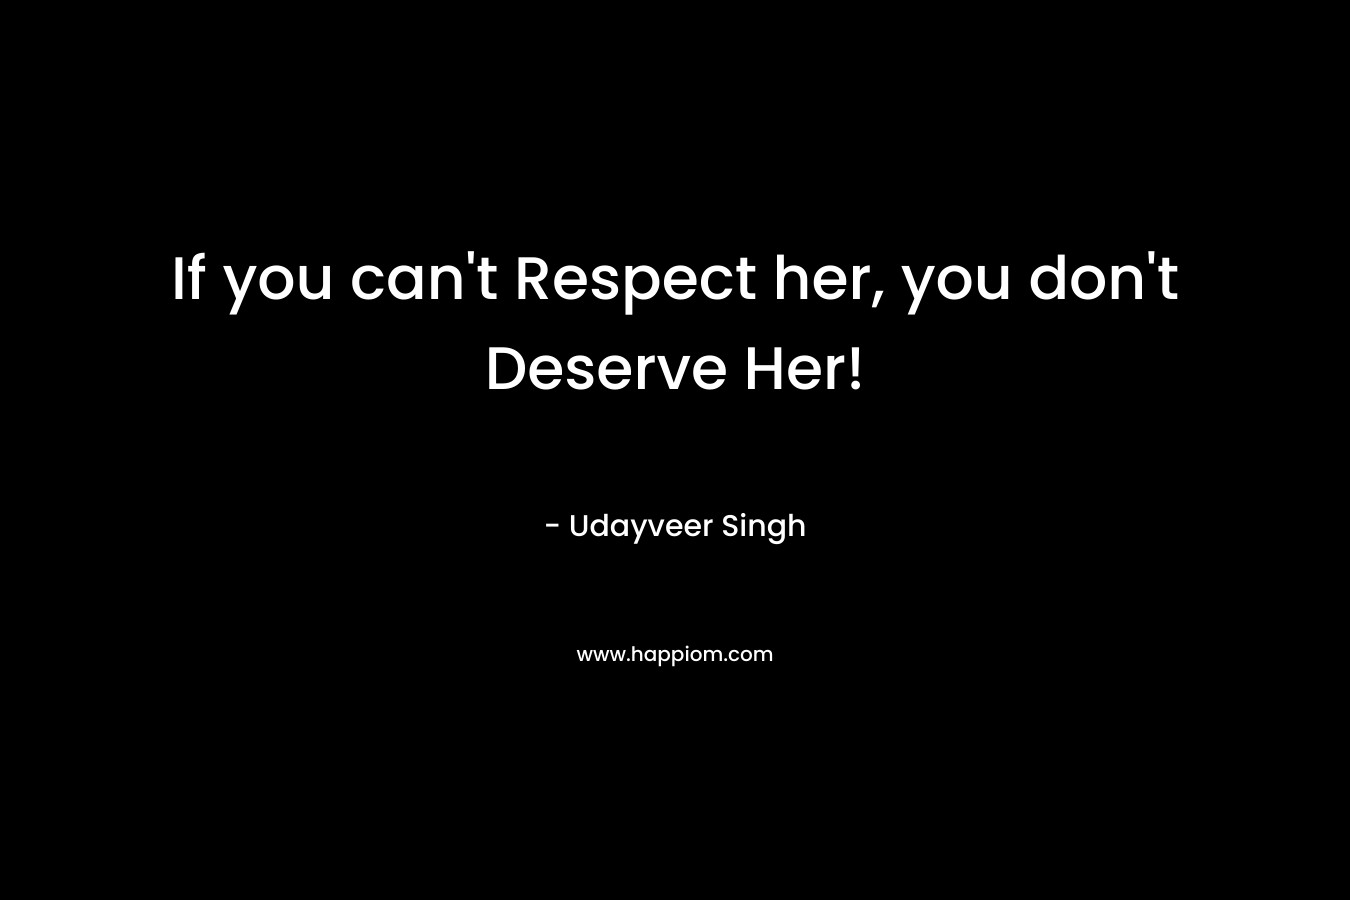 If you can’t Respect her, you don’t Deserve Her! – Udayveer Singh